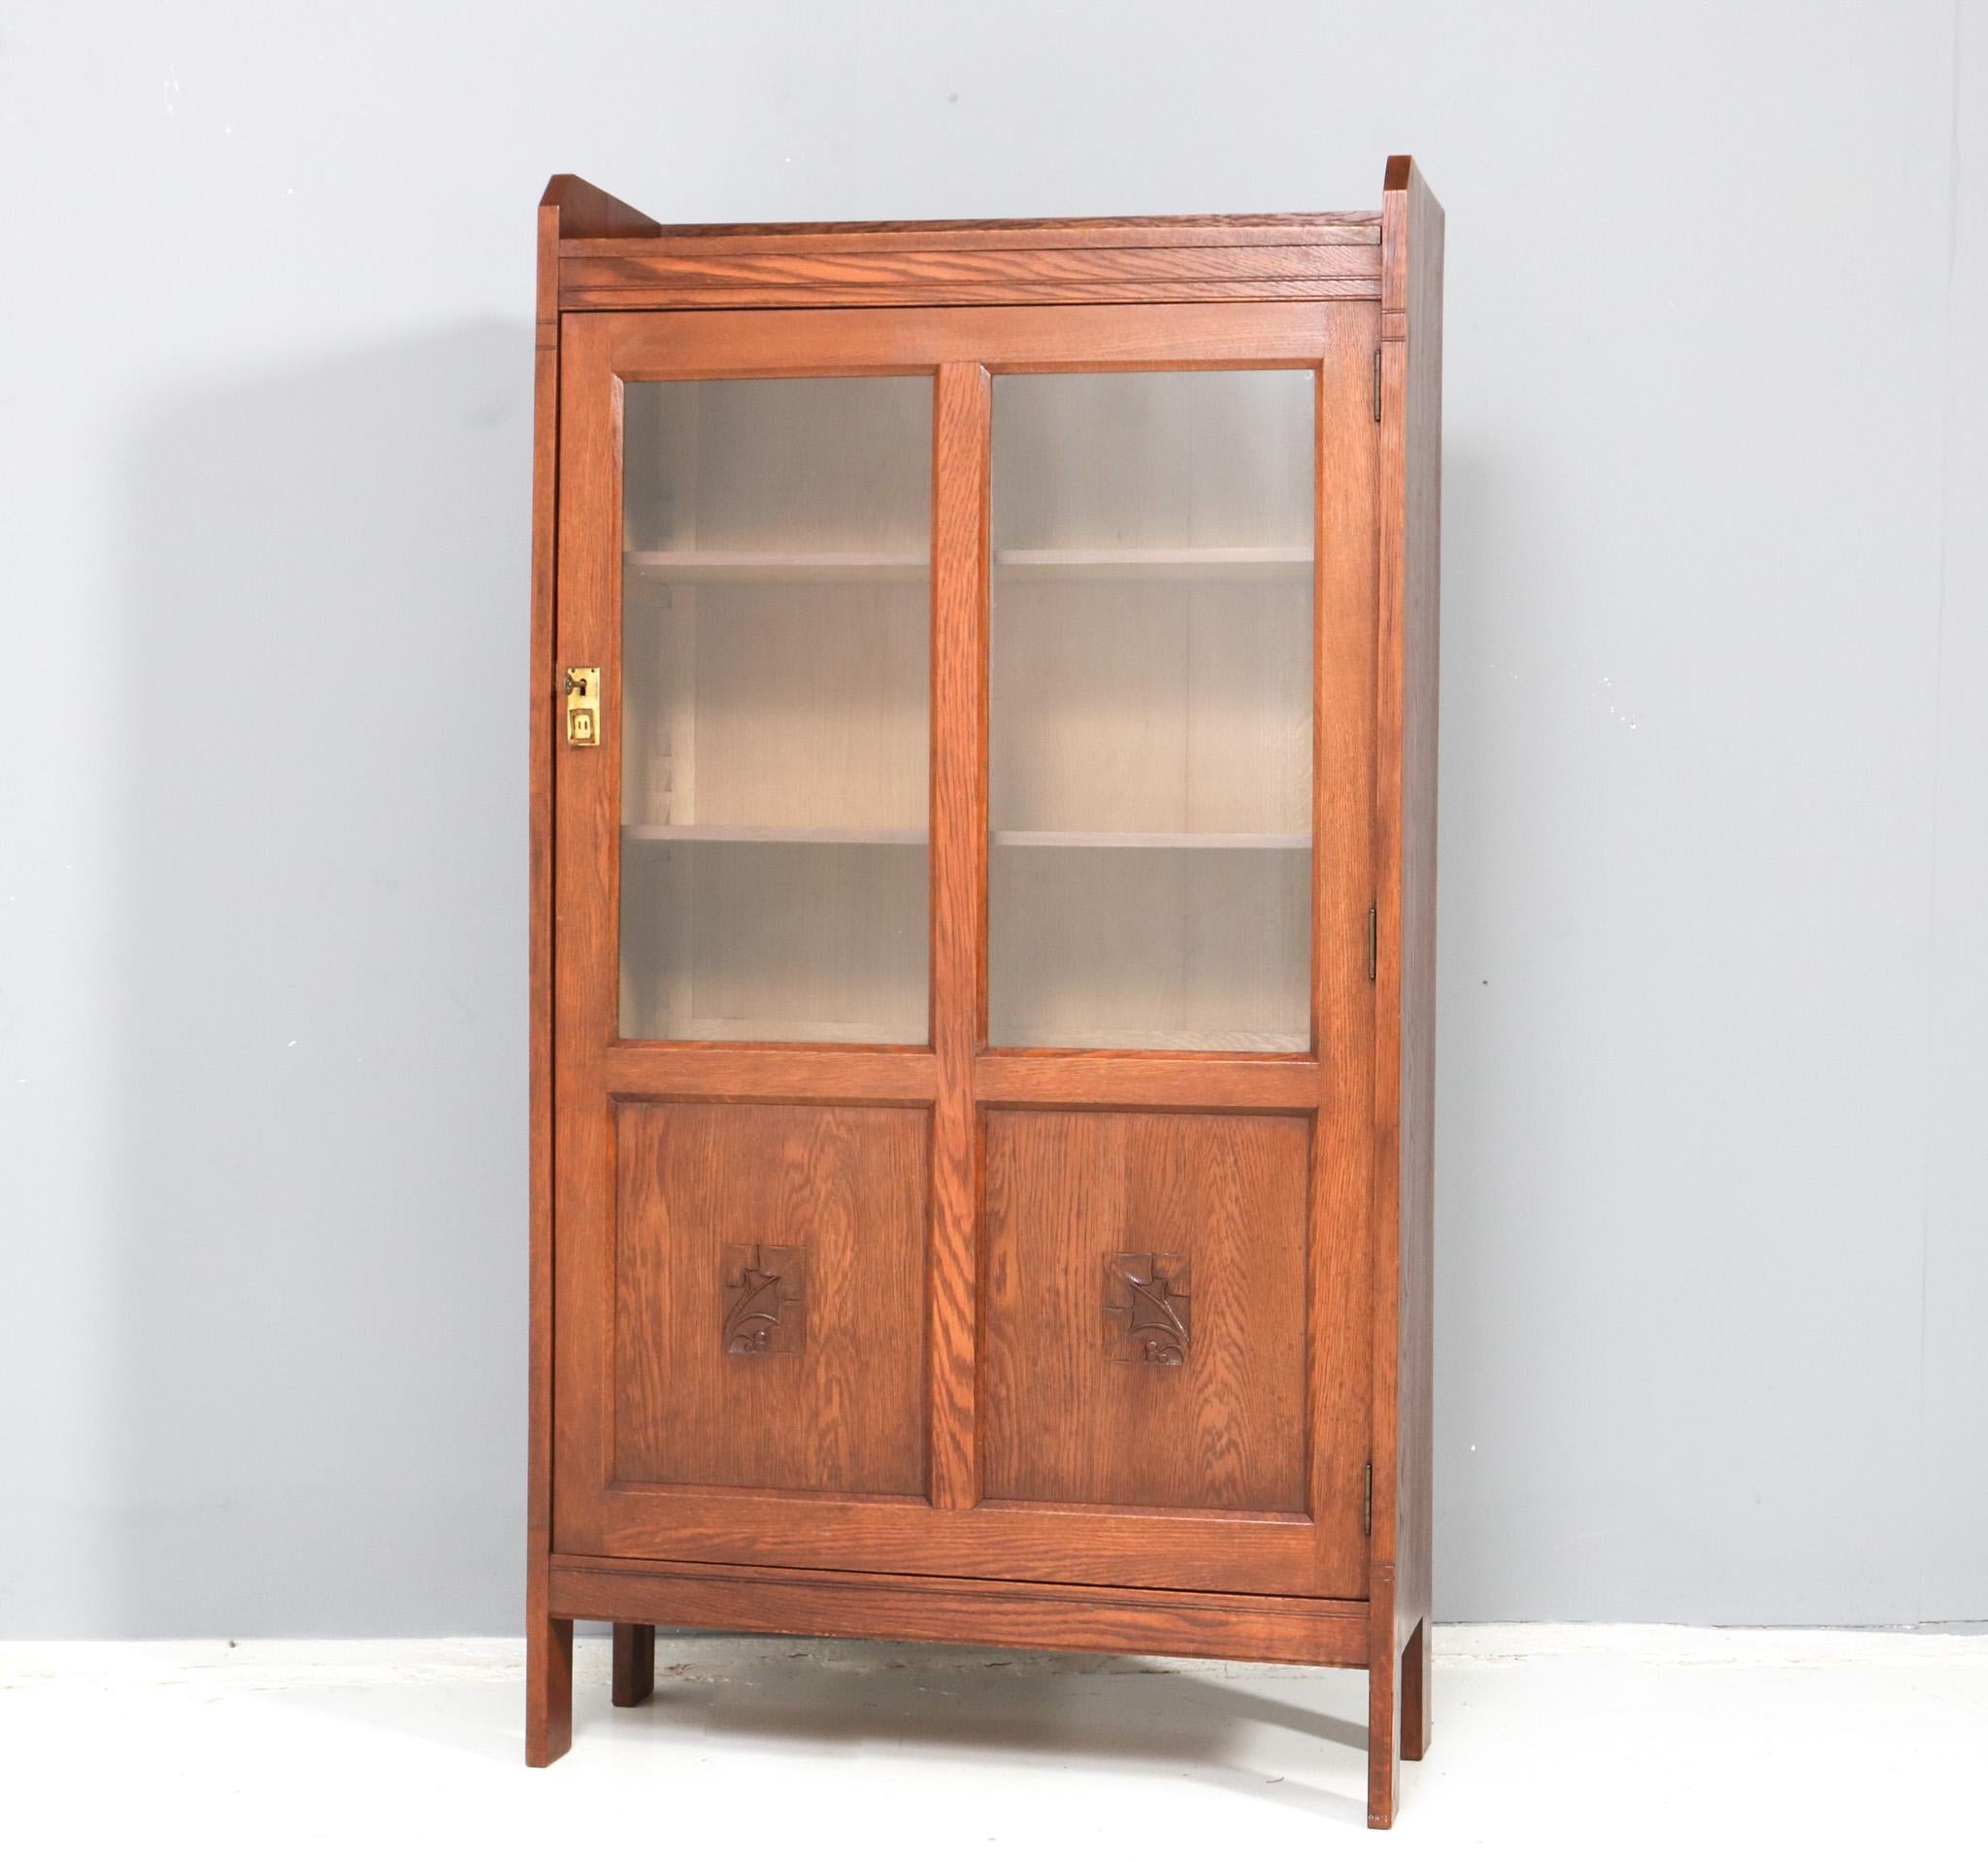 Stunning and rare Art Nouveau one-door bookcase.
Striking Dutch design from the 1900s.
Solid oak with original beveled glass in the door.
Three solid oak shelves, adjustable in height.
Original brass handle with original lock and key in good working